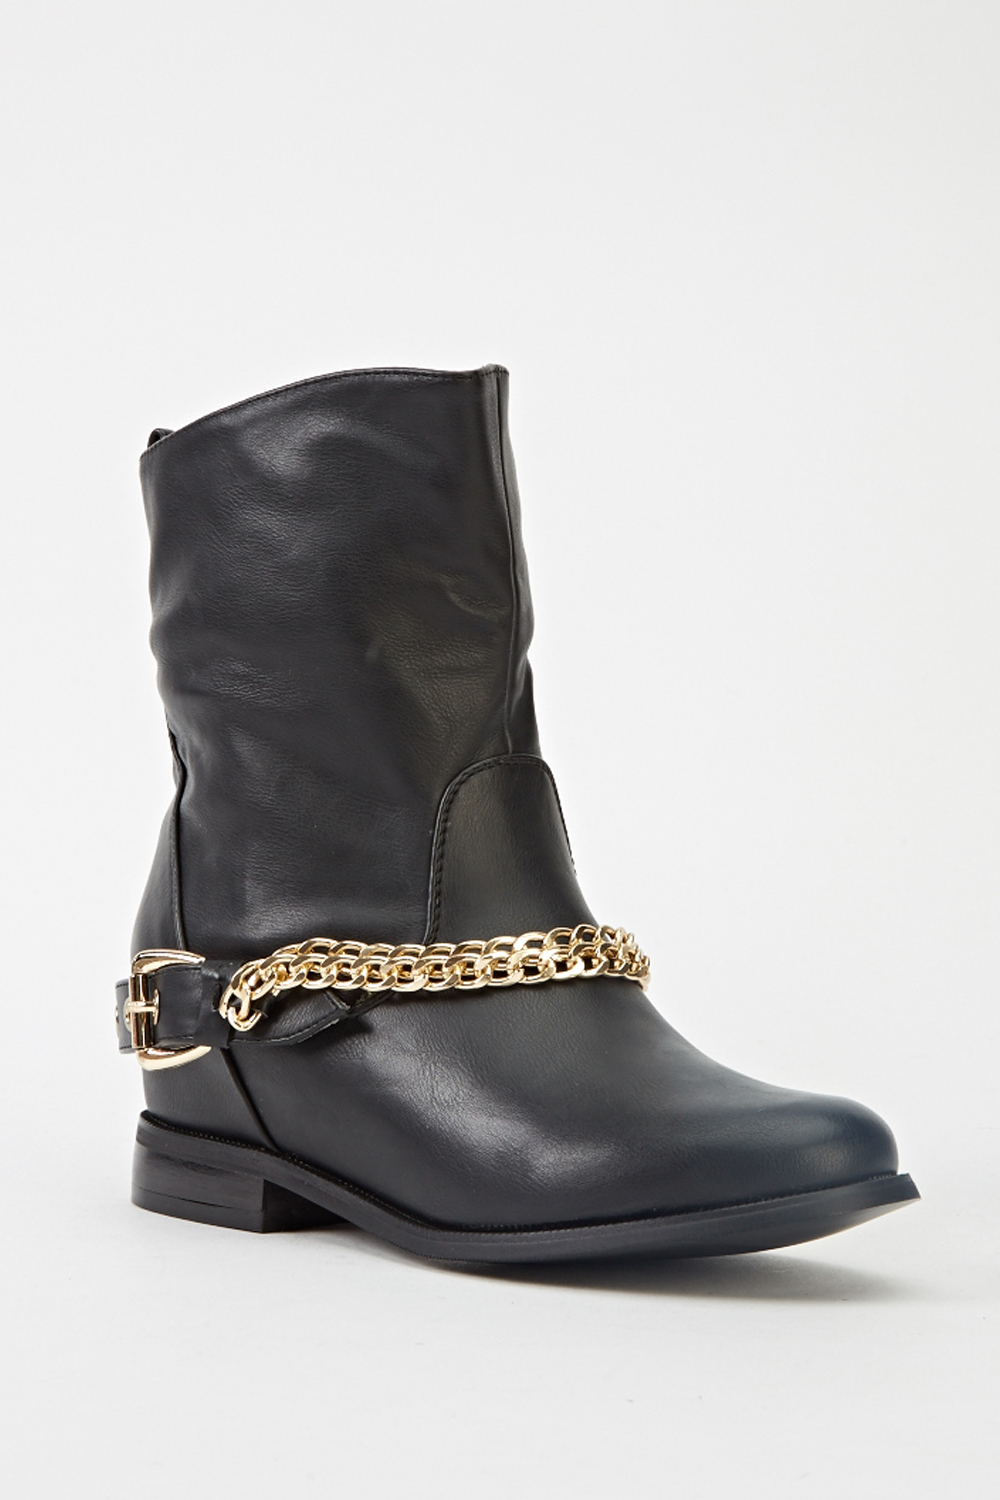 Chain Encrusted Wedge Boots - Just $6